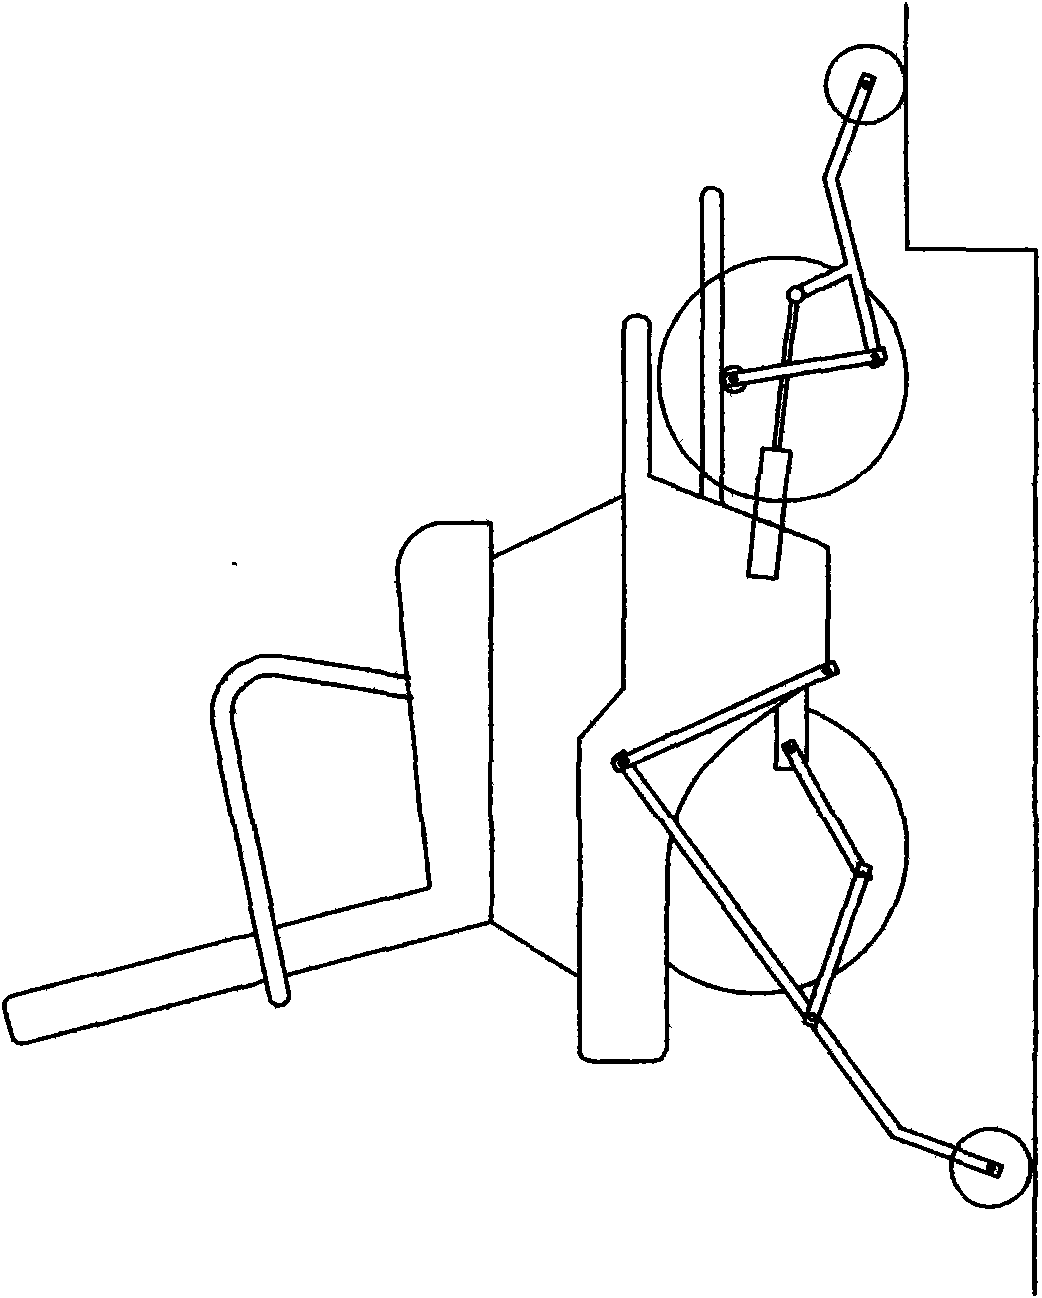 Step-striding device used on wheelchair